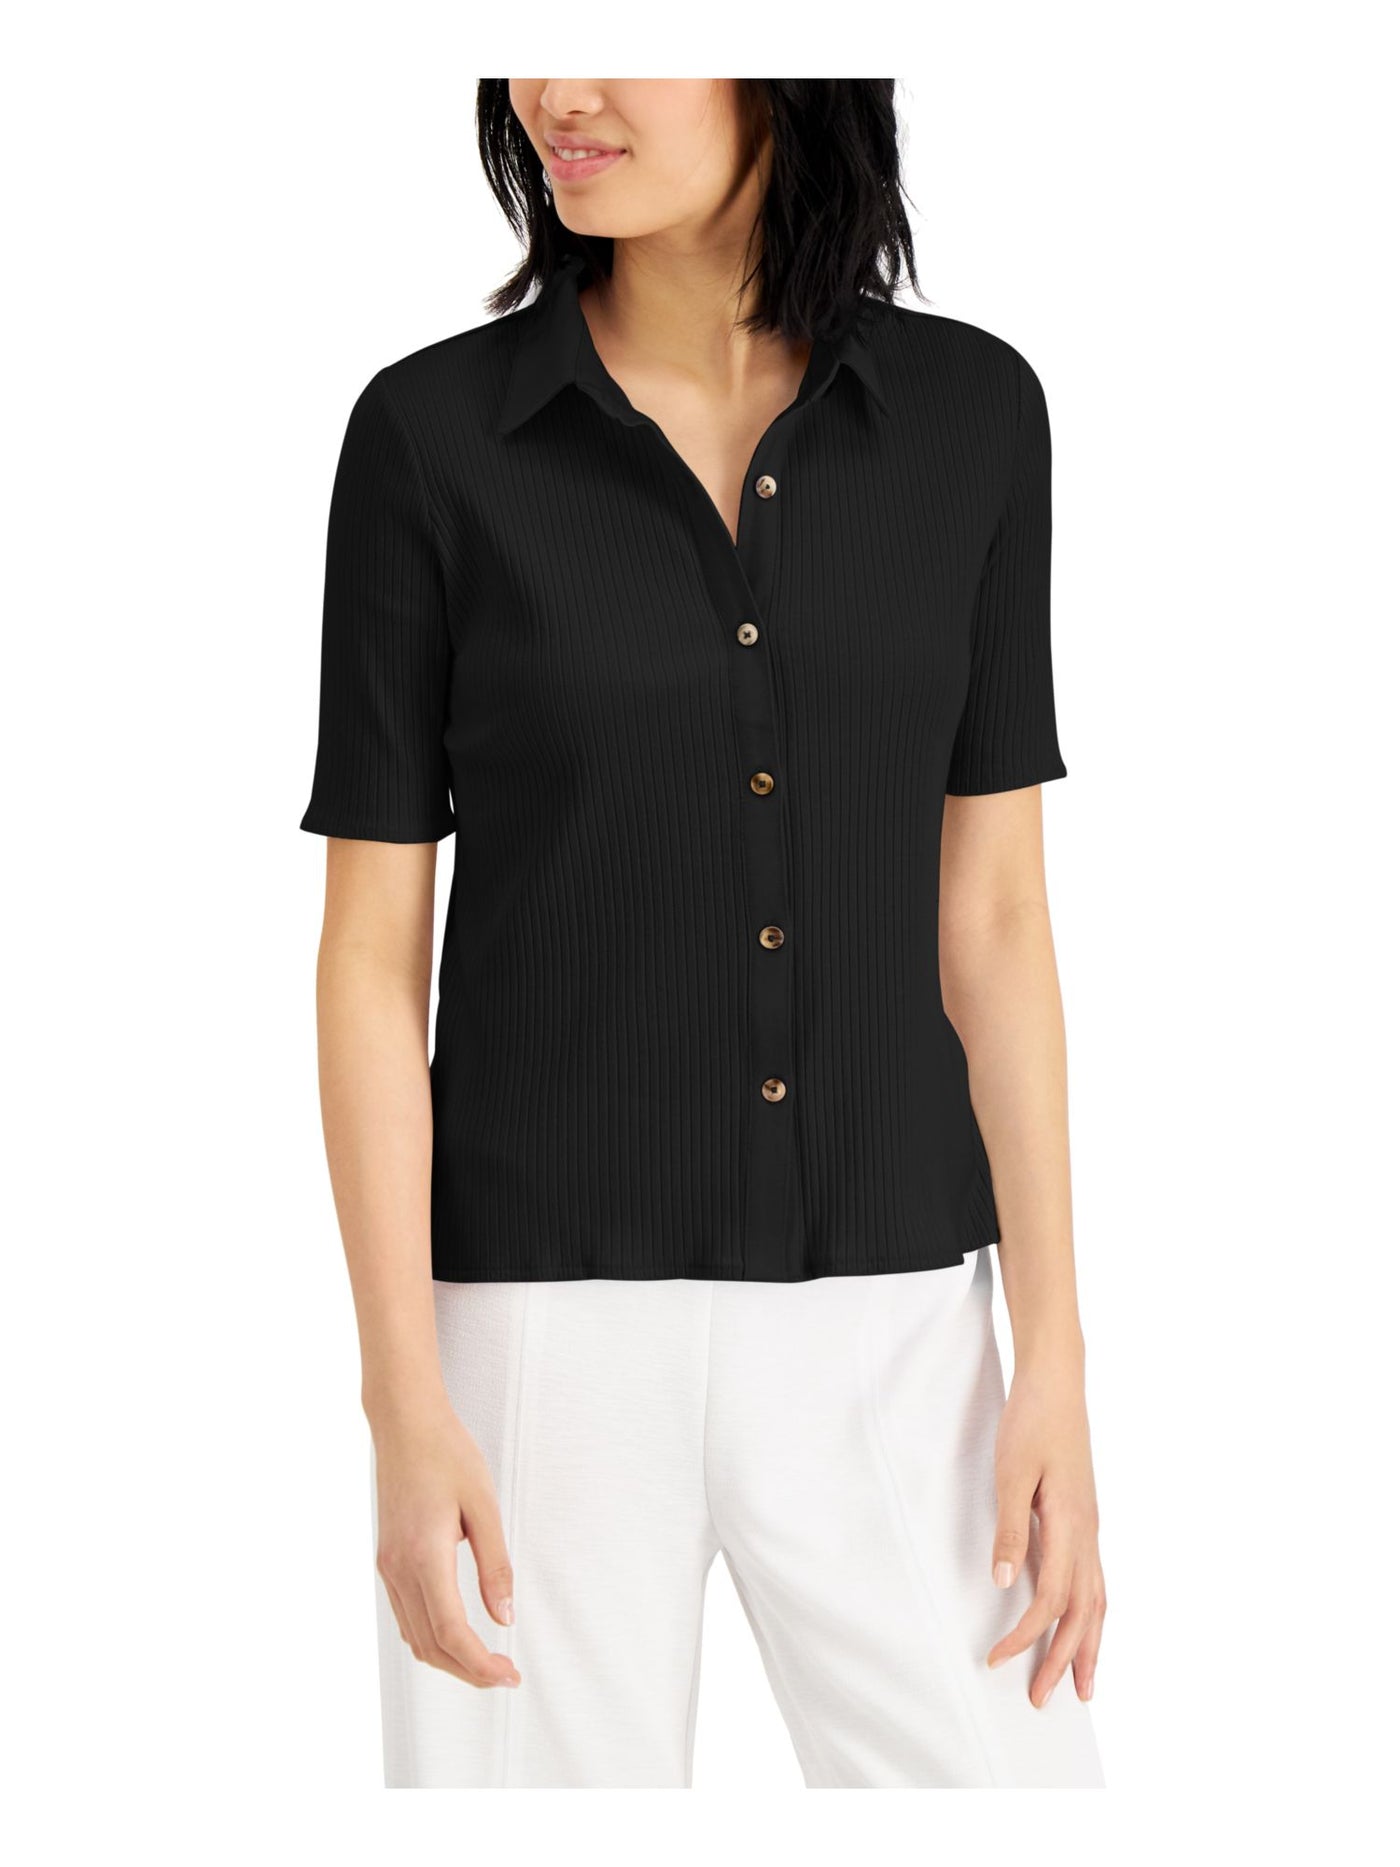 ALFANI Womens Black Short Sleeve Collared Wear To Work Button Up Top M